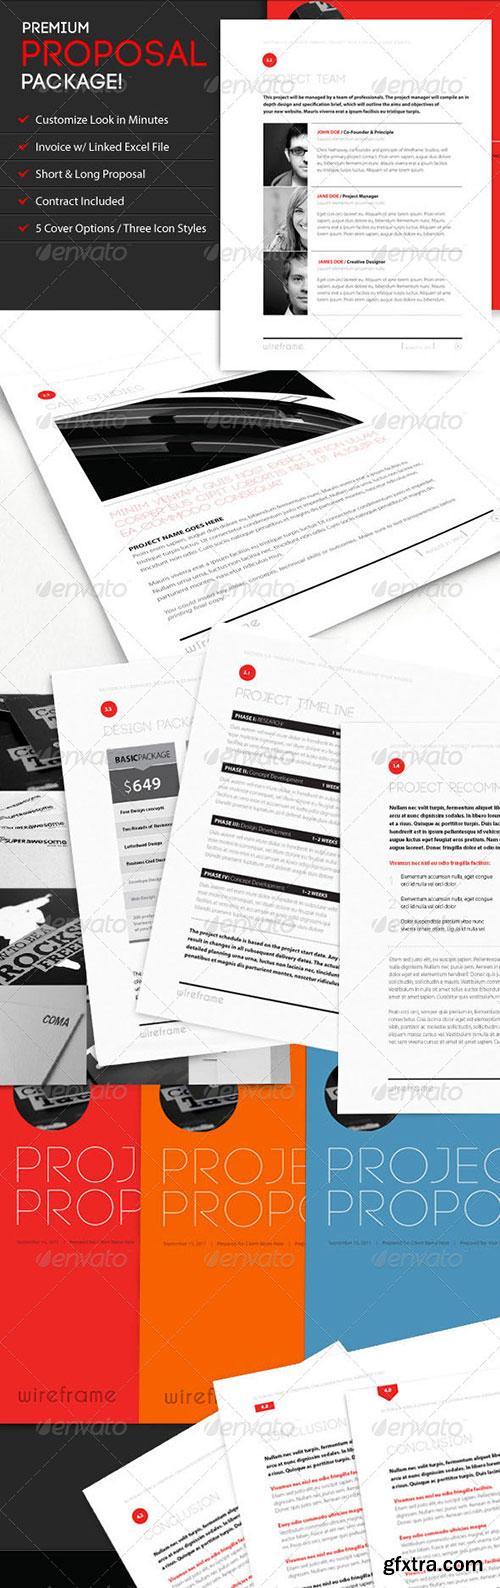 GraphicRiver - Wireframe Proposal Template Invoice & Contract